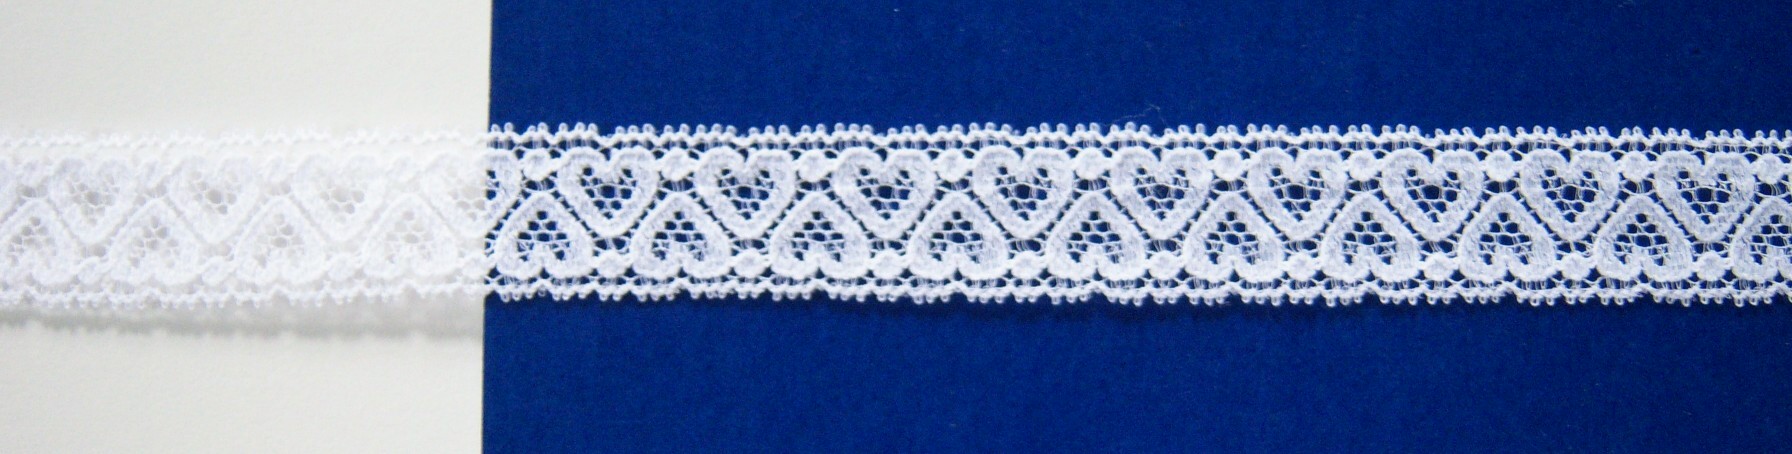 White Hearts 7/8" Stretch Lace